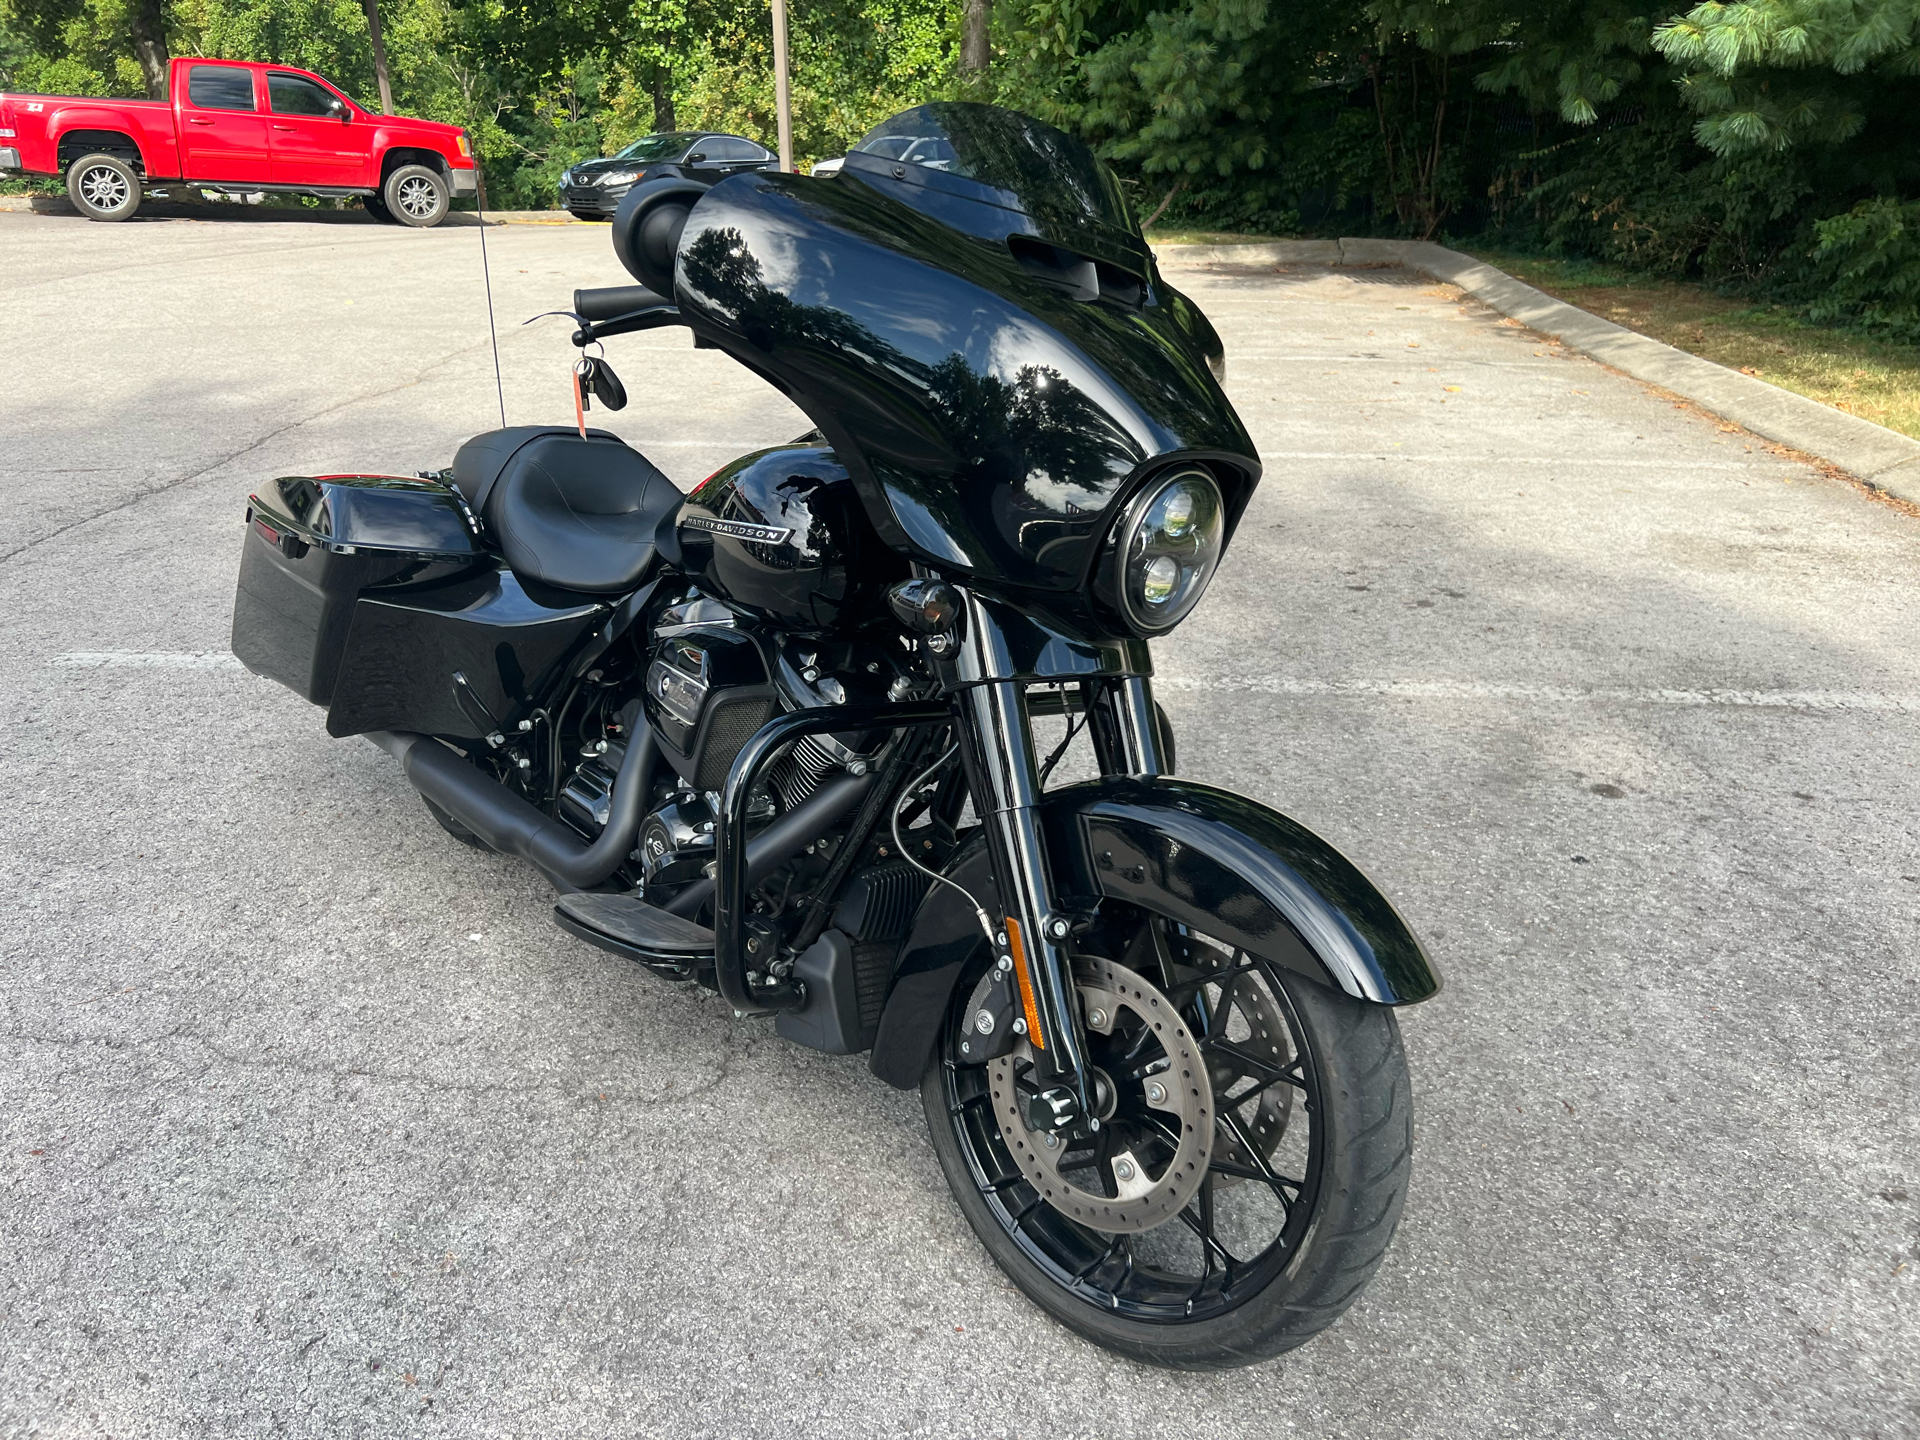 2020 Harley-Davidson Street Glide® Special in Franklin, Tennessee - Photo 4